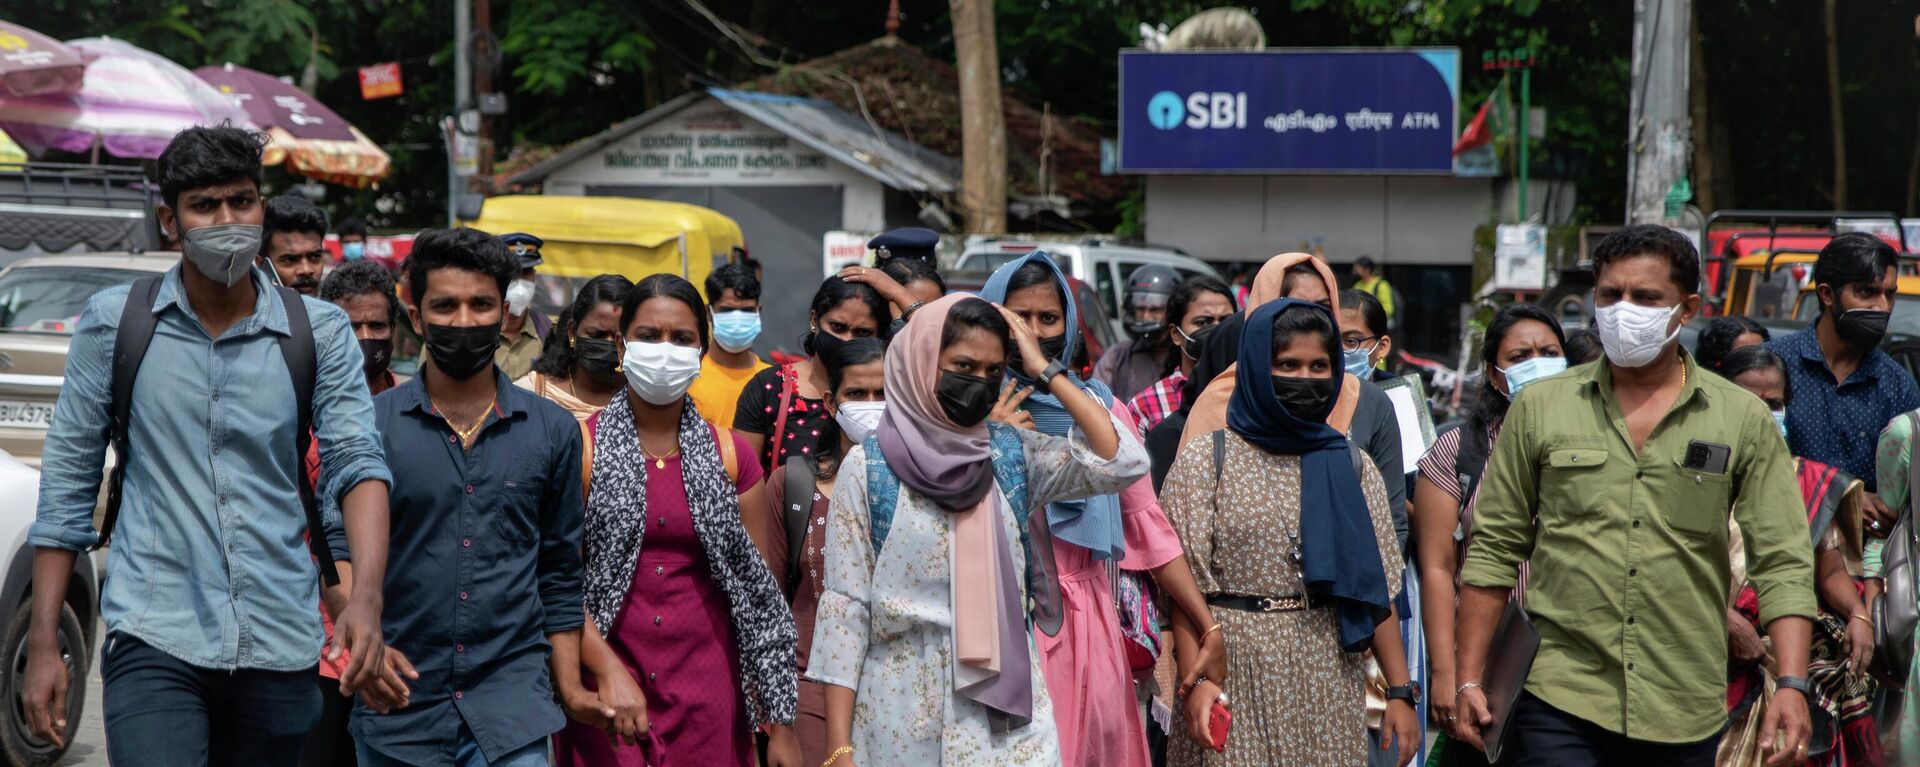 Job aspirants wearing face masks cross a street as they arrive for interviews organized by the state run employability center in Kochi, Kerala state, India - Sputnik International, 1920, 18.10.2022